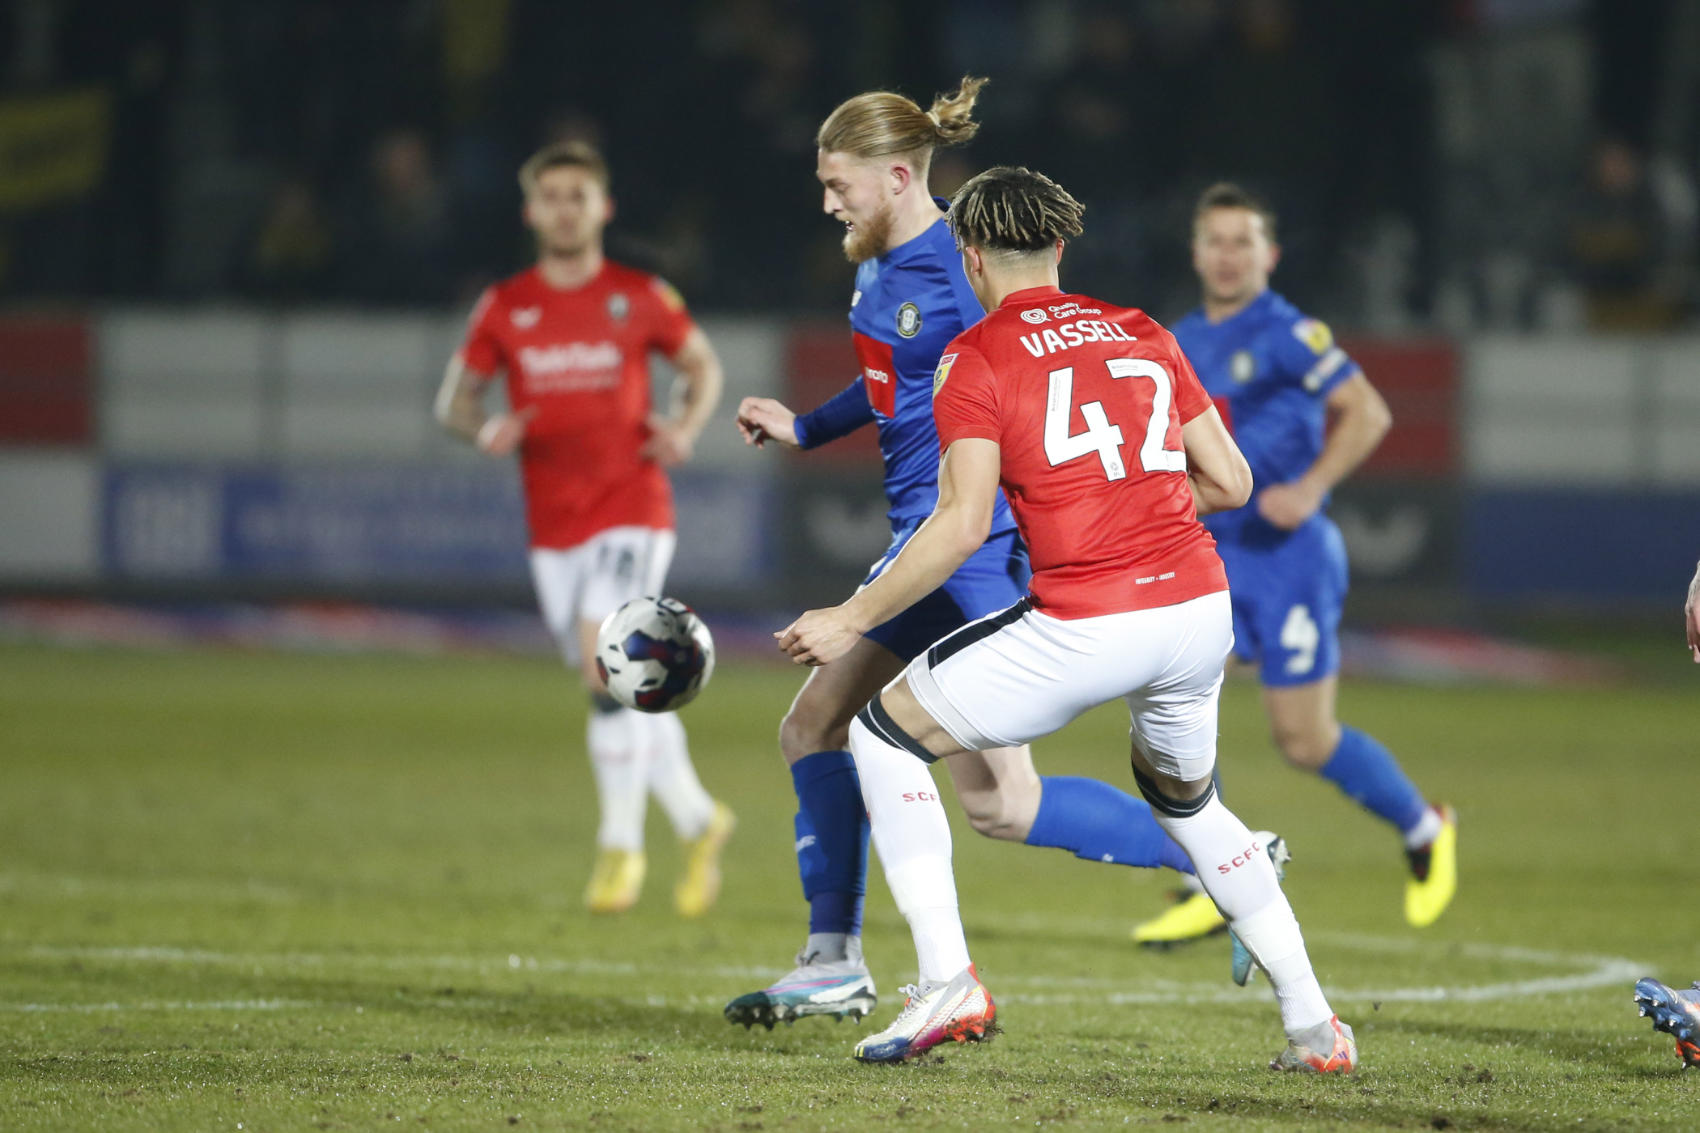 Harrogate Town forward Luke Armstrong (29) goes past Salford City defender Theo Vassell (42) during the EFL Sky Bet League 2 match between Salford City and Harrogate Town at the Peninsula Stadium, Salford, United Kingdom on 14 February 2023.